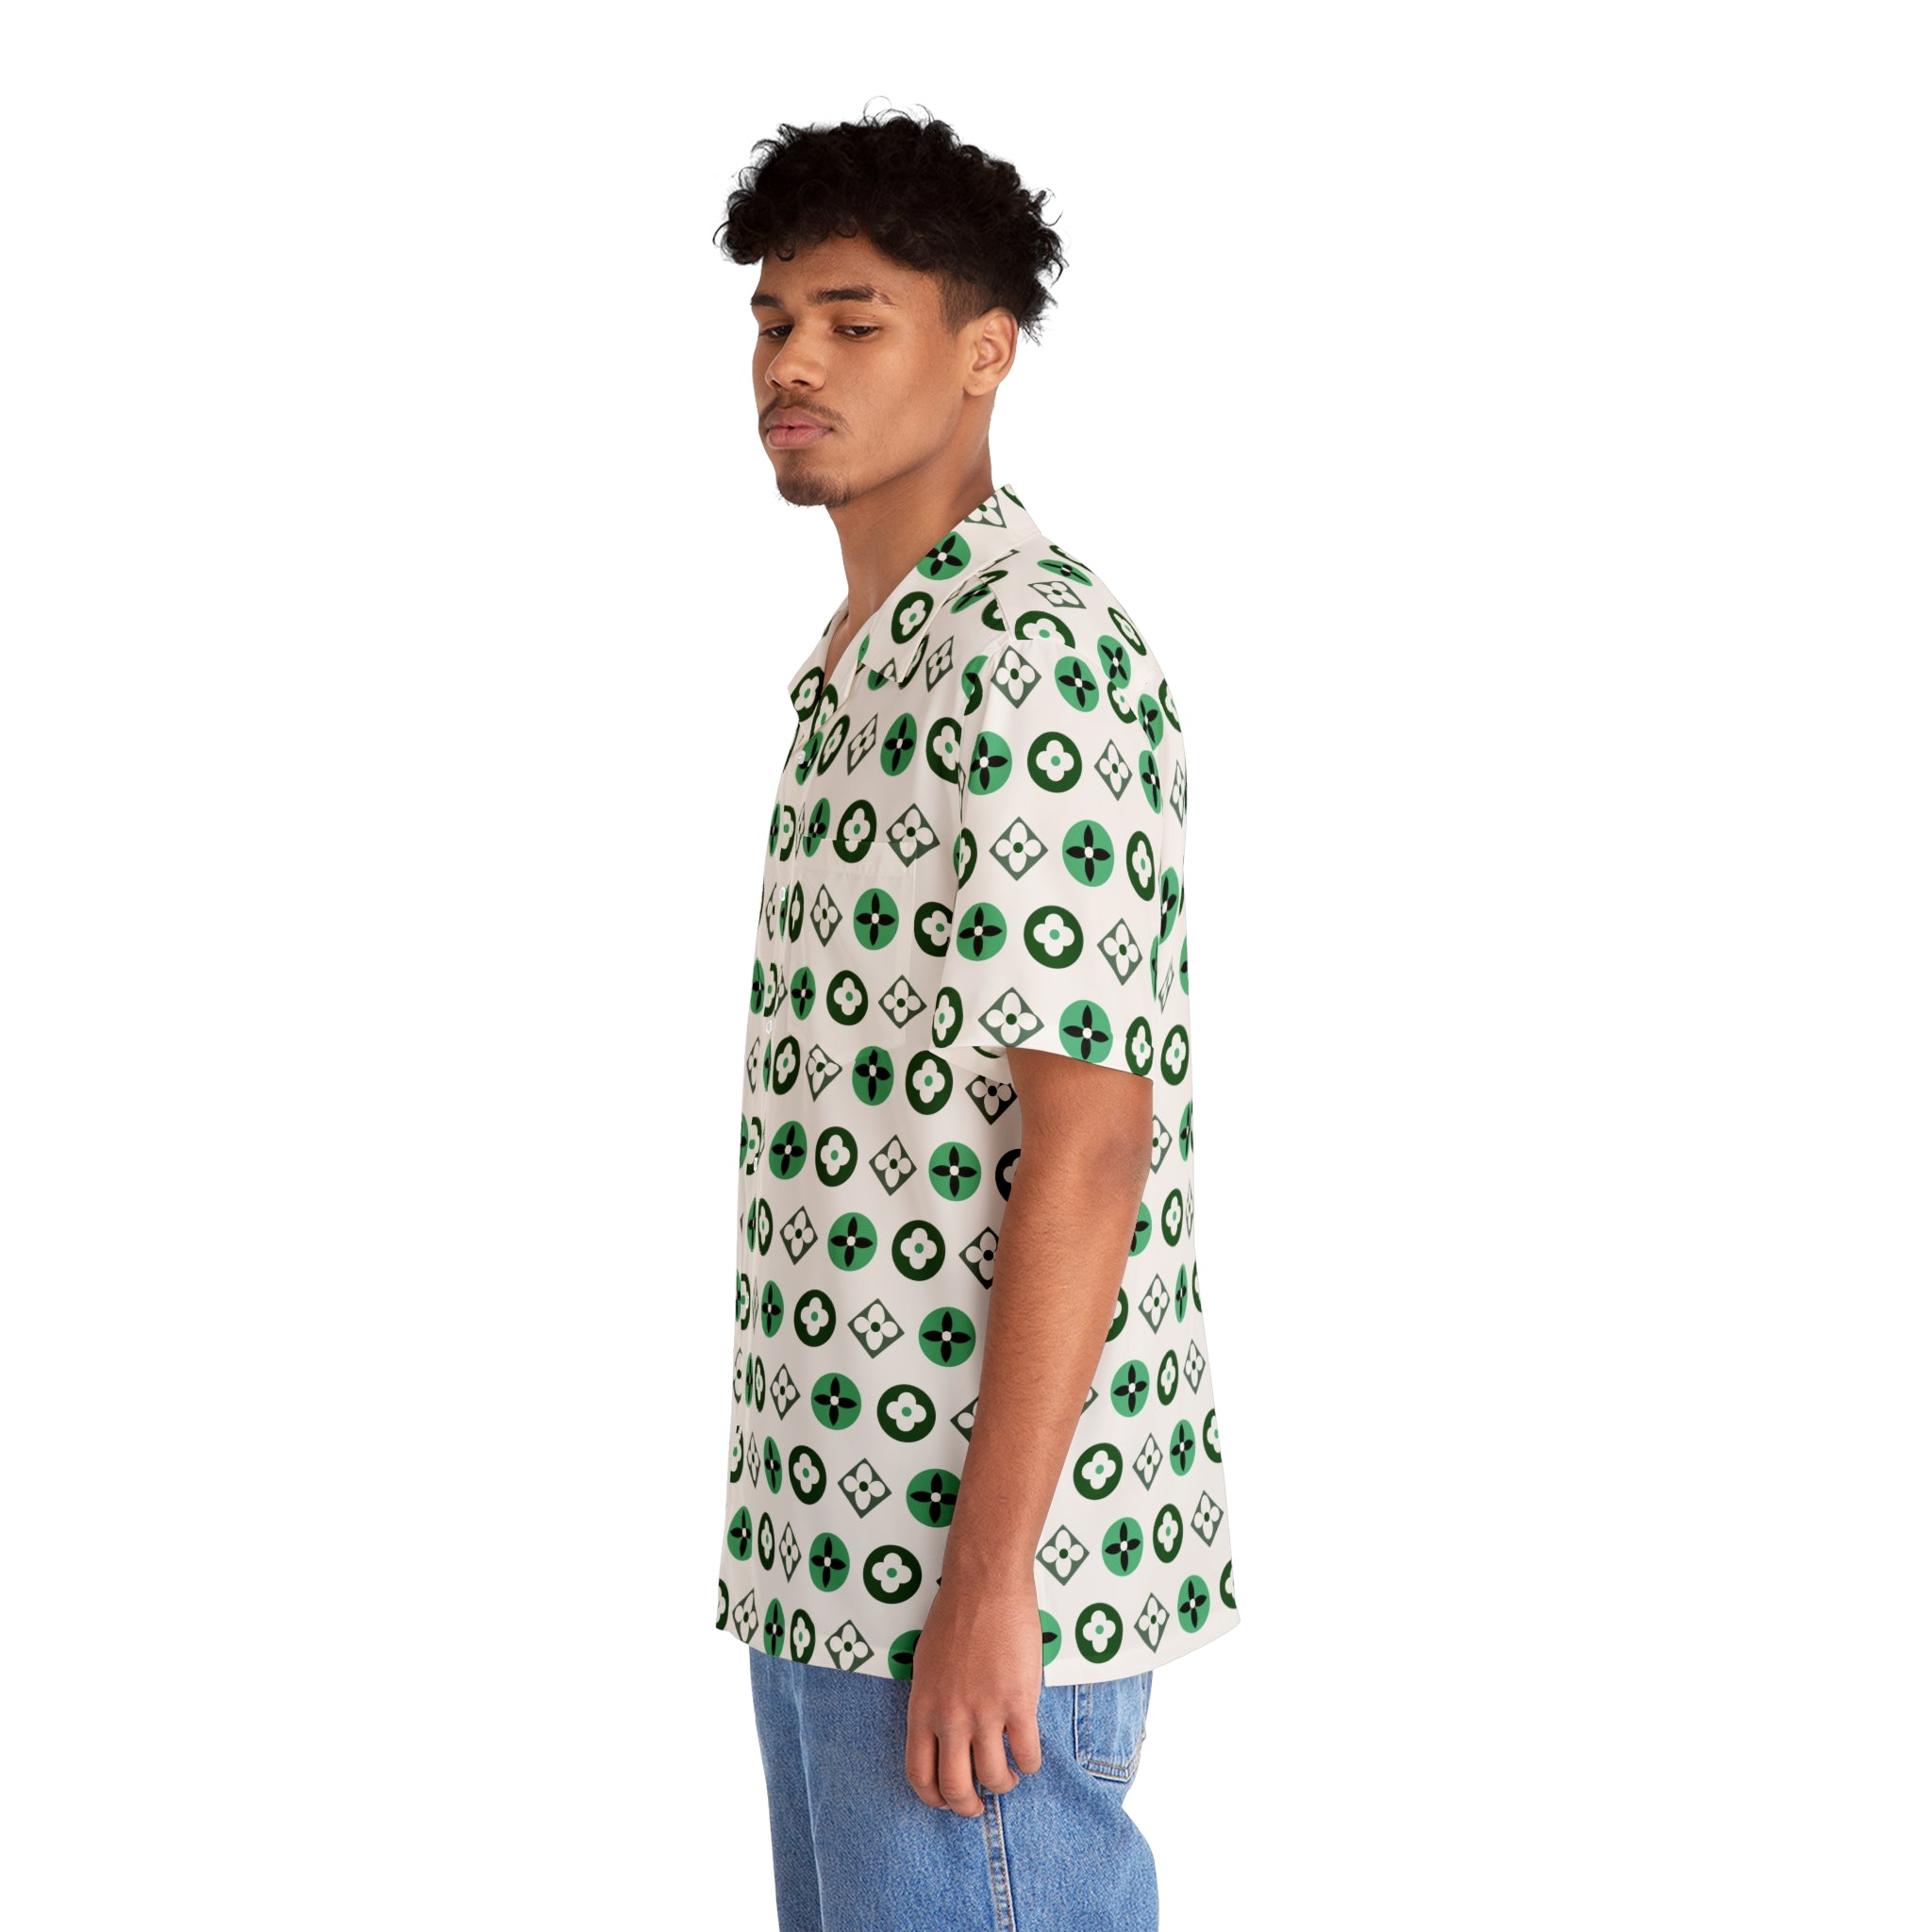  Groove Collection Trilogy of Icons Pattern (Greens) White Unisex Gender Neutral Button Up Shirt, Hawaiian Shirt Men's Shirts